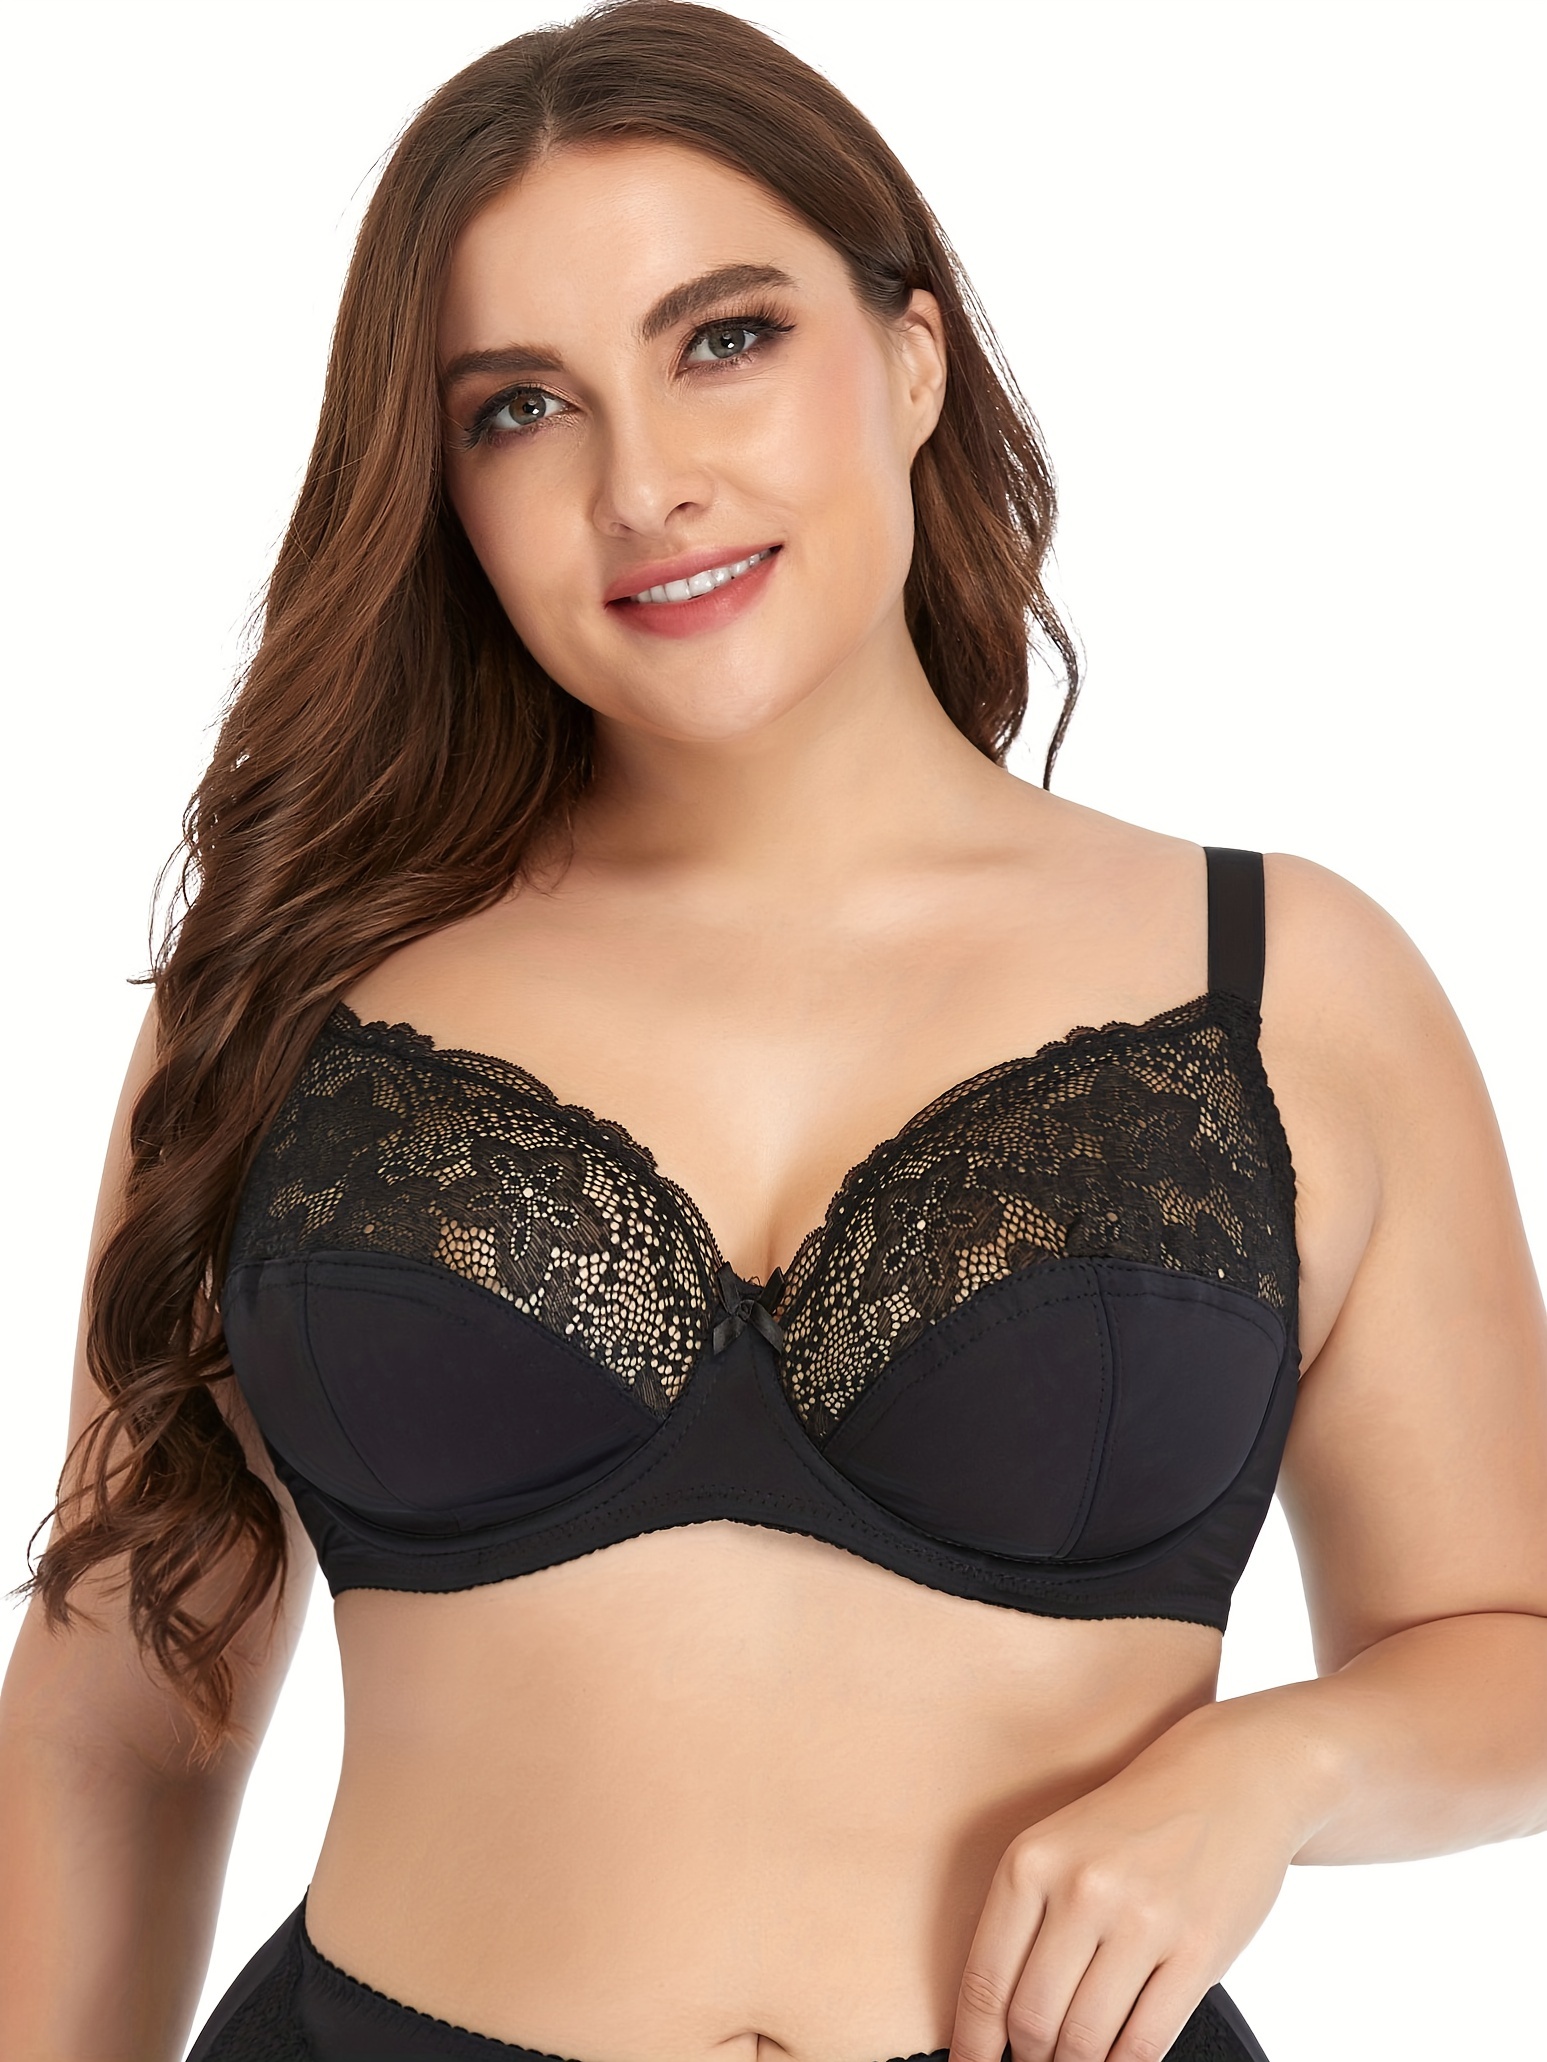 Womens Plus Size Bras Full Coverage Lace Underwire Unlined Bra Eggplant 36C